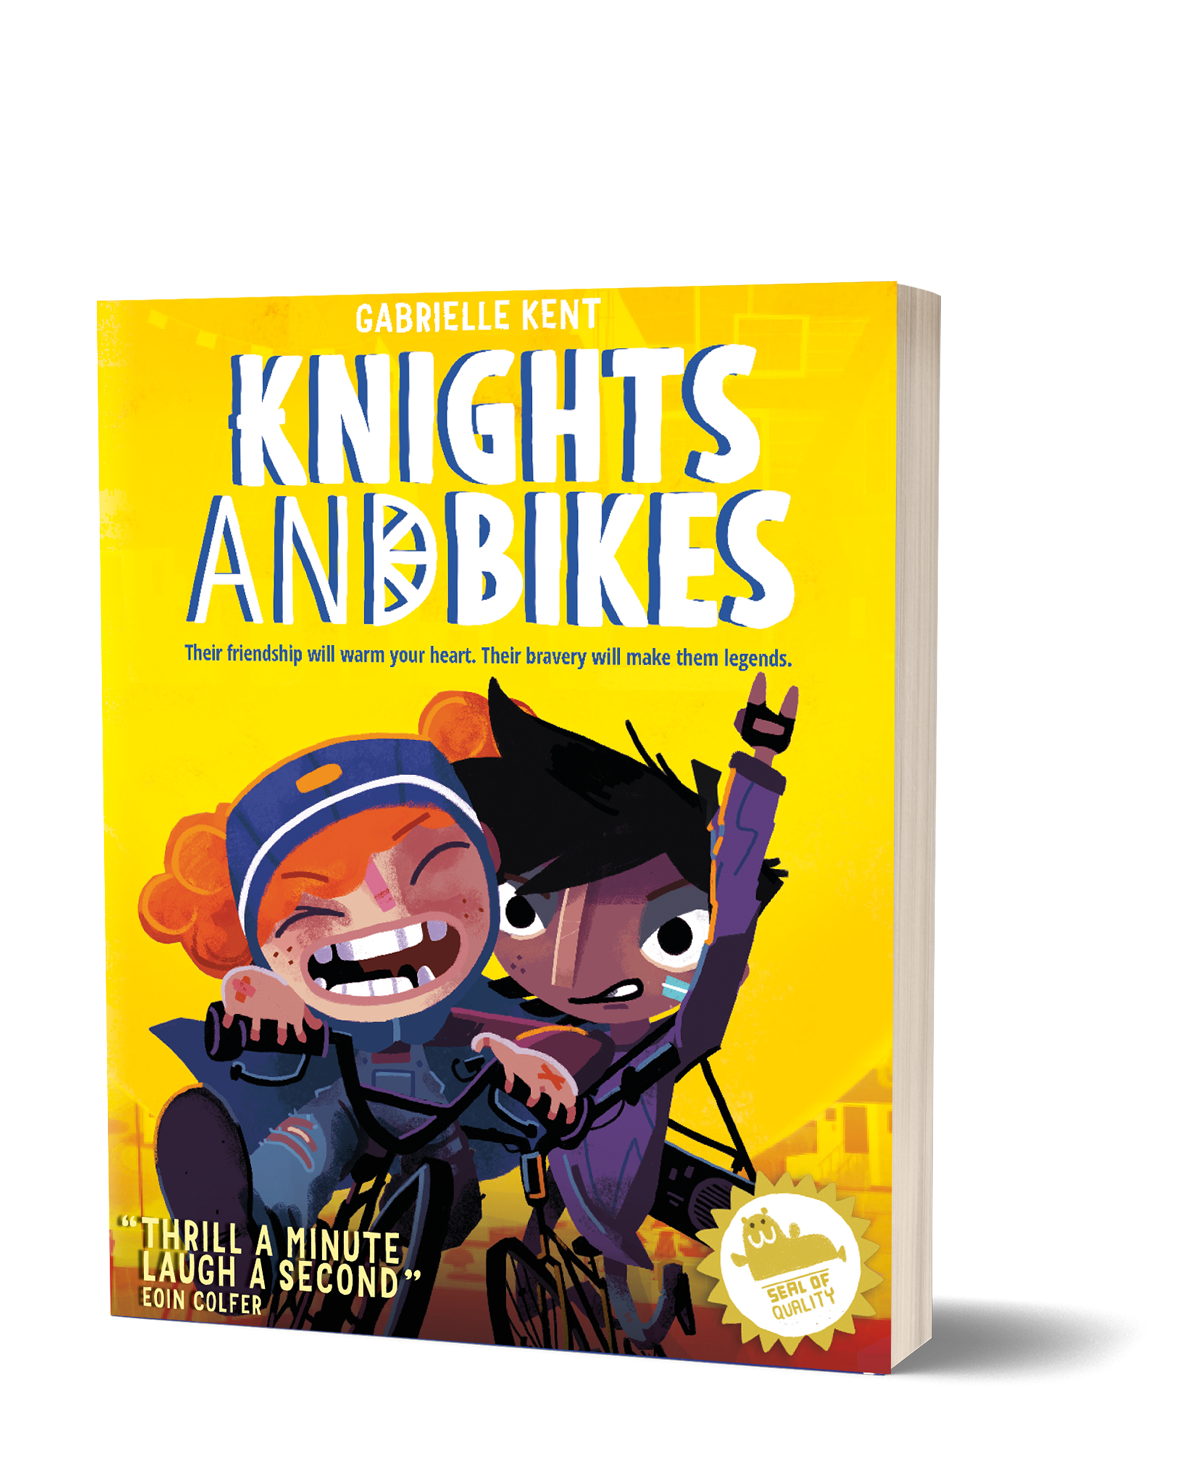 Knights And Bikes